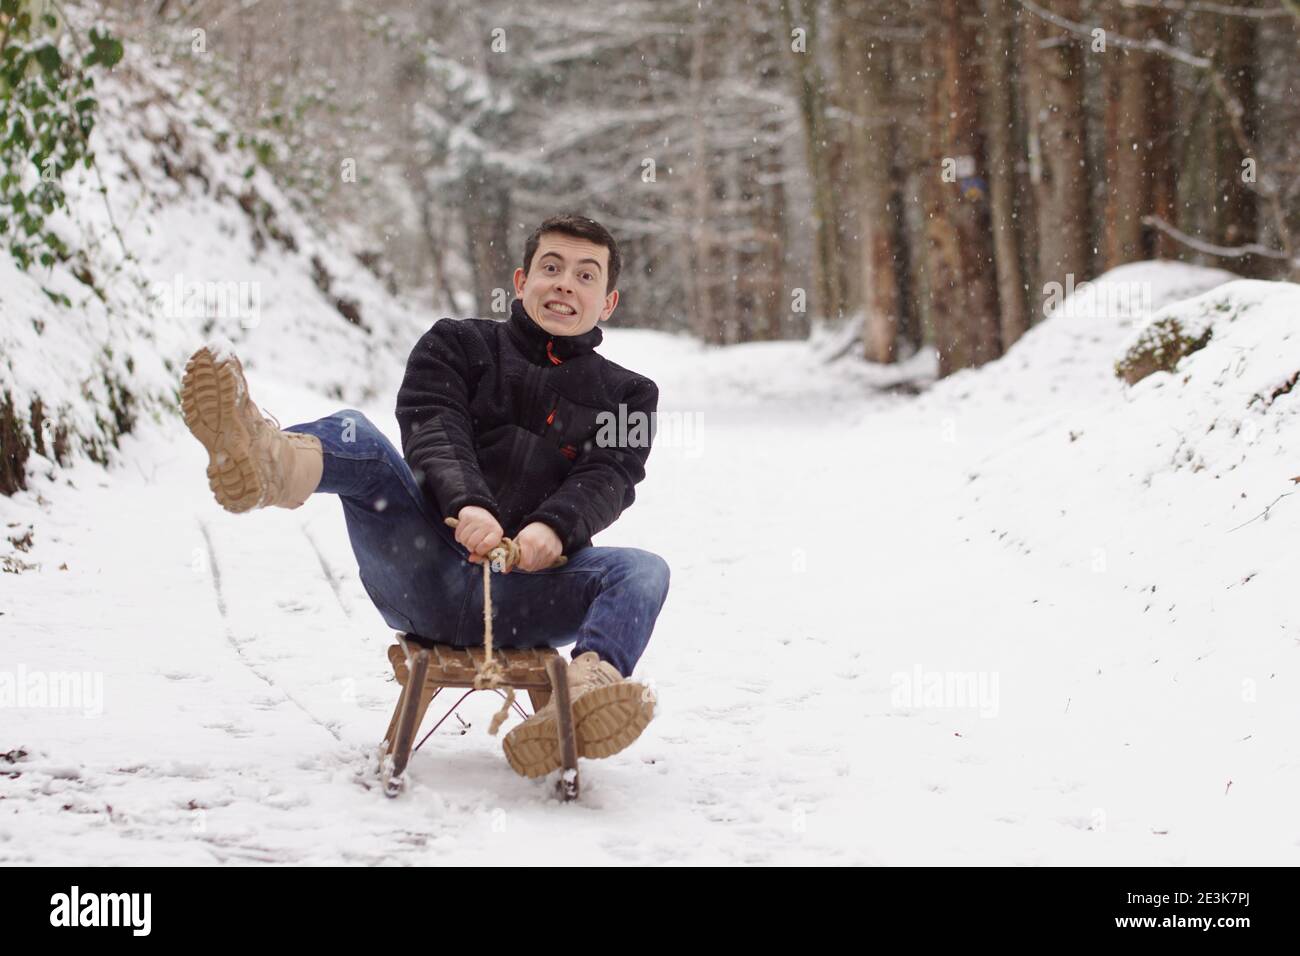 It's getting to fast - Man riding a sleigh with frightened face, struggling and falling off the sledge Stock Photo